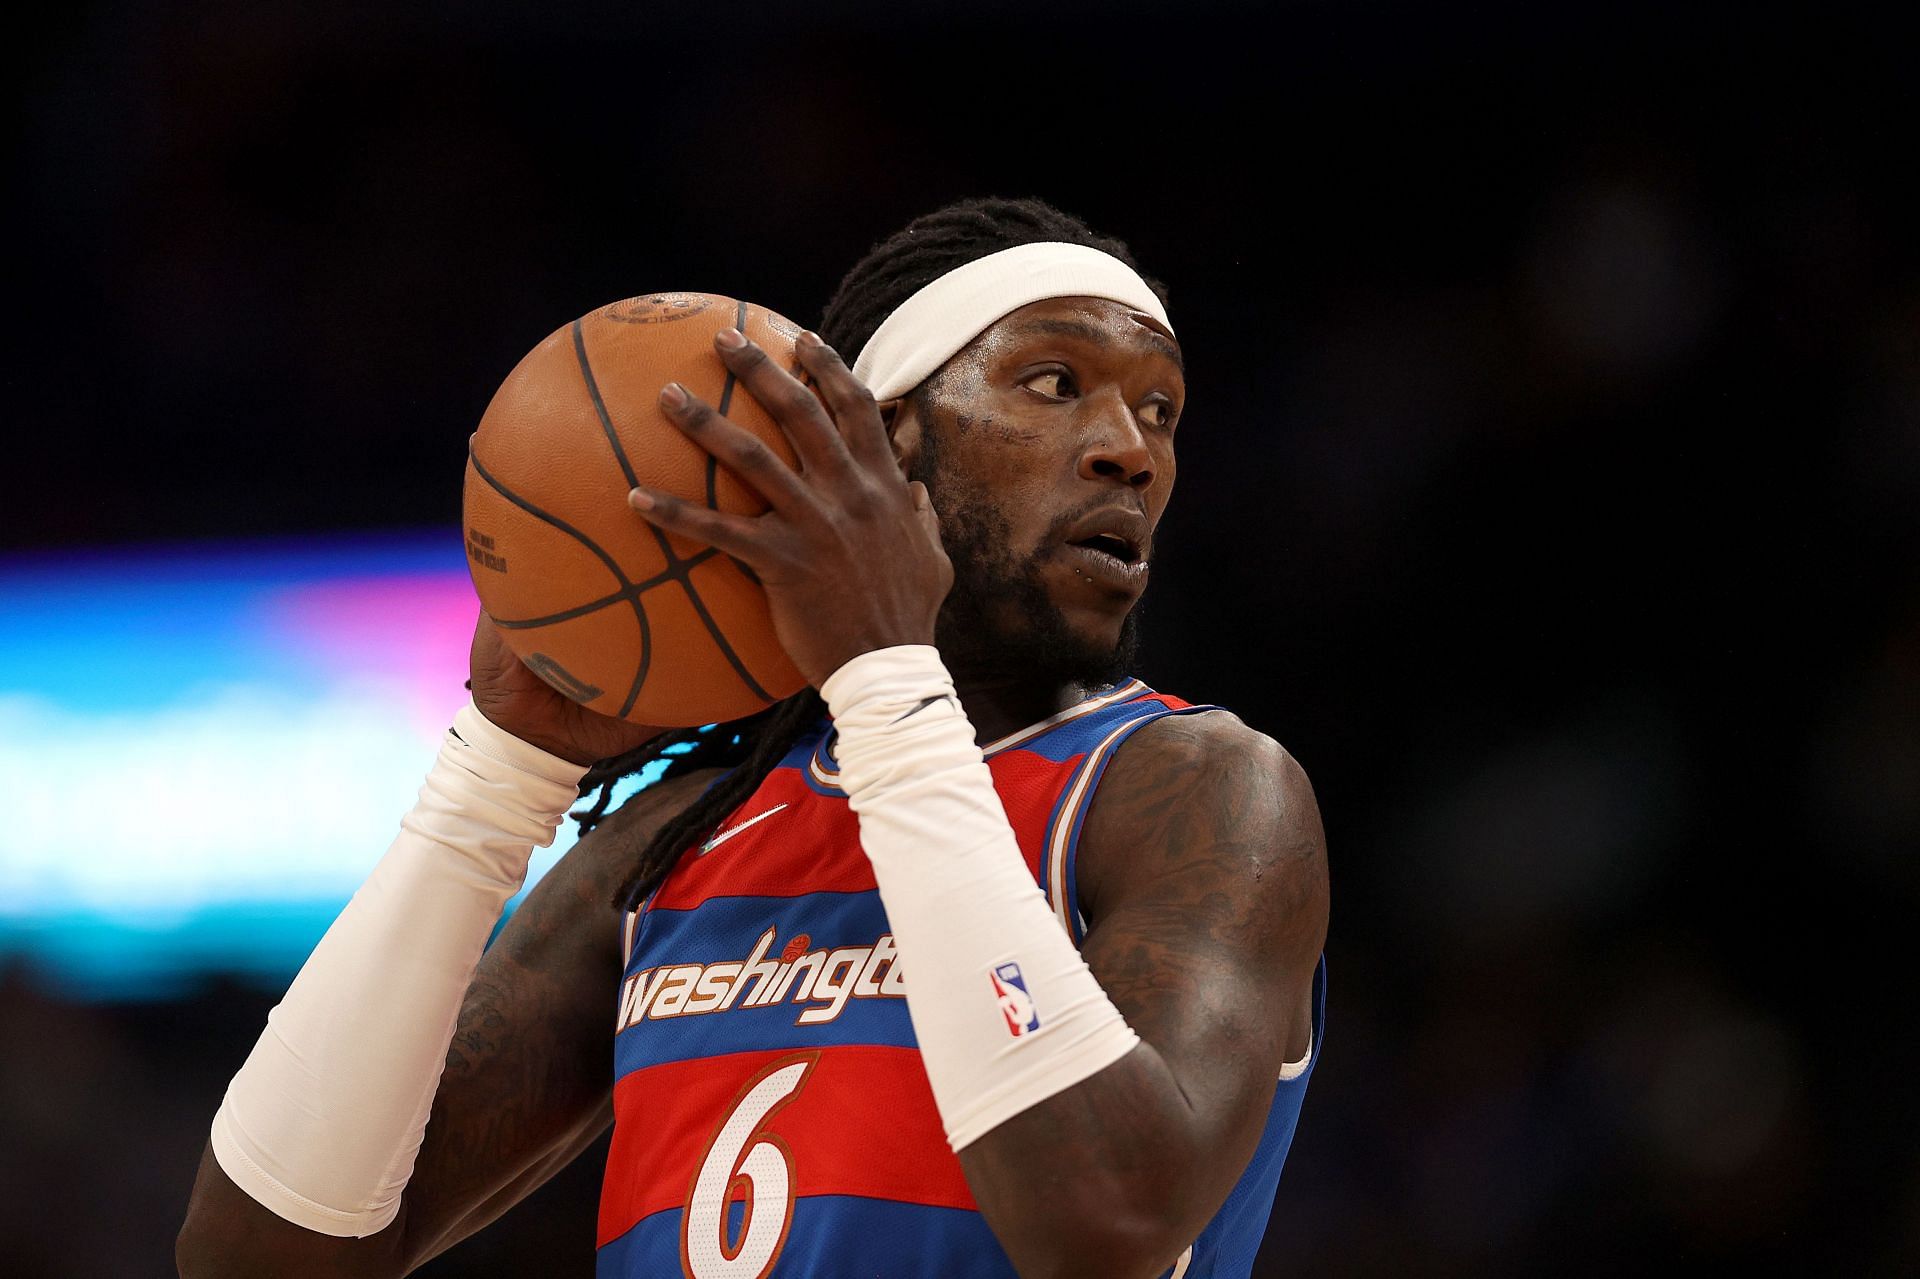 Washington Wizards forward Montrezl Harrell has been outstanding this year